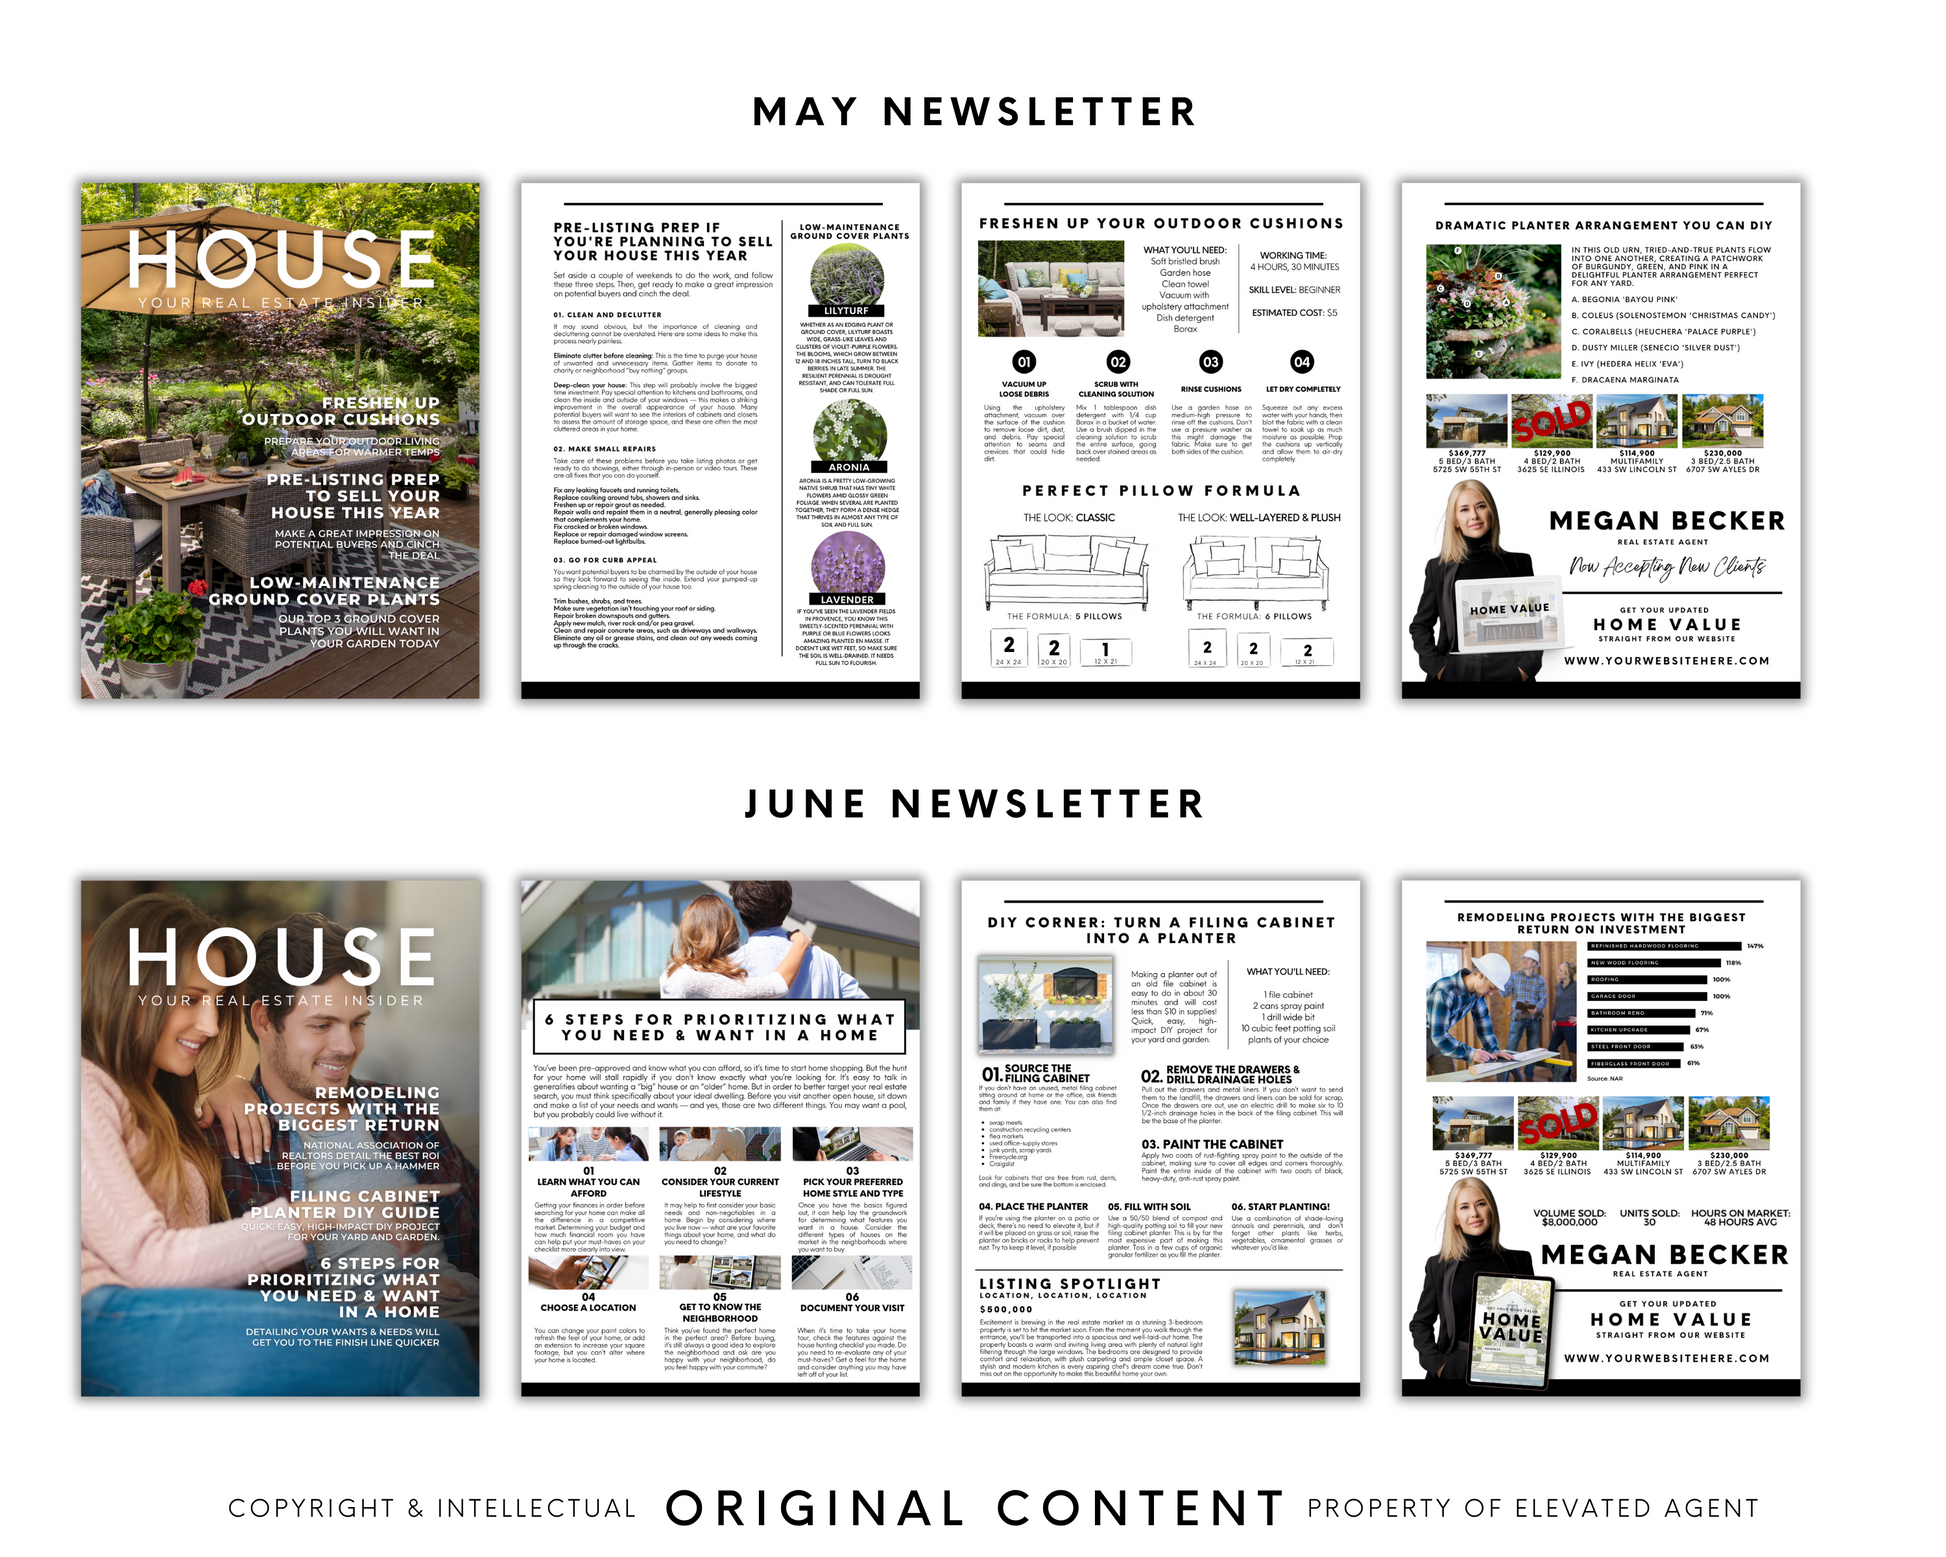 real estate newsletter, real estate newsletter template, newsletter template, real estate templates, real estate monthly newsletter